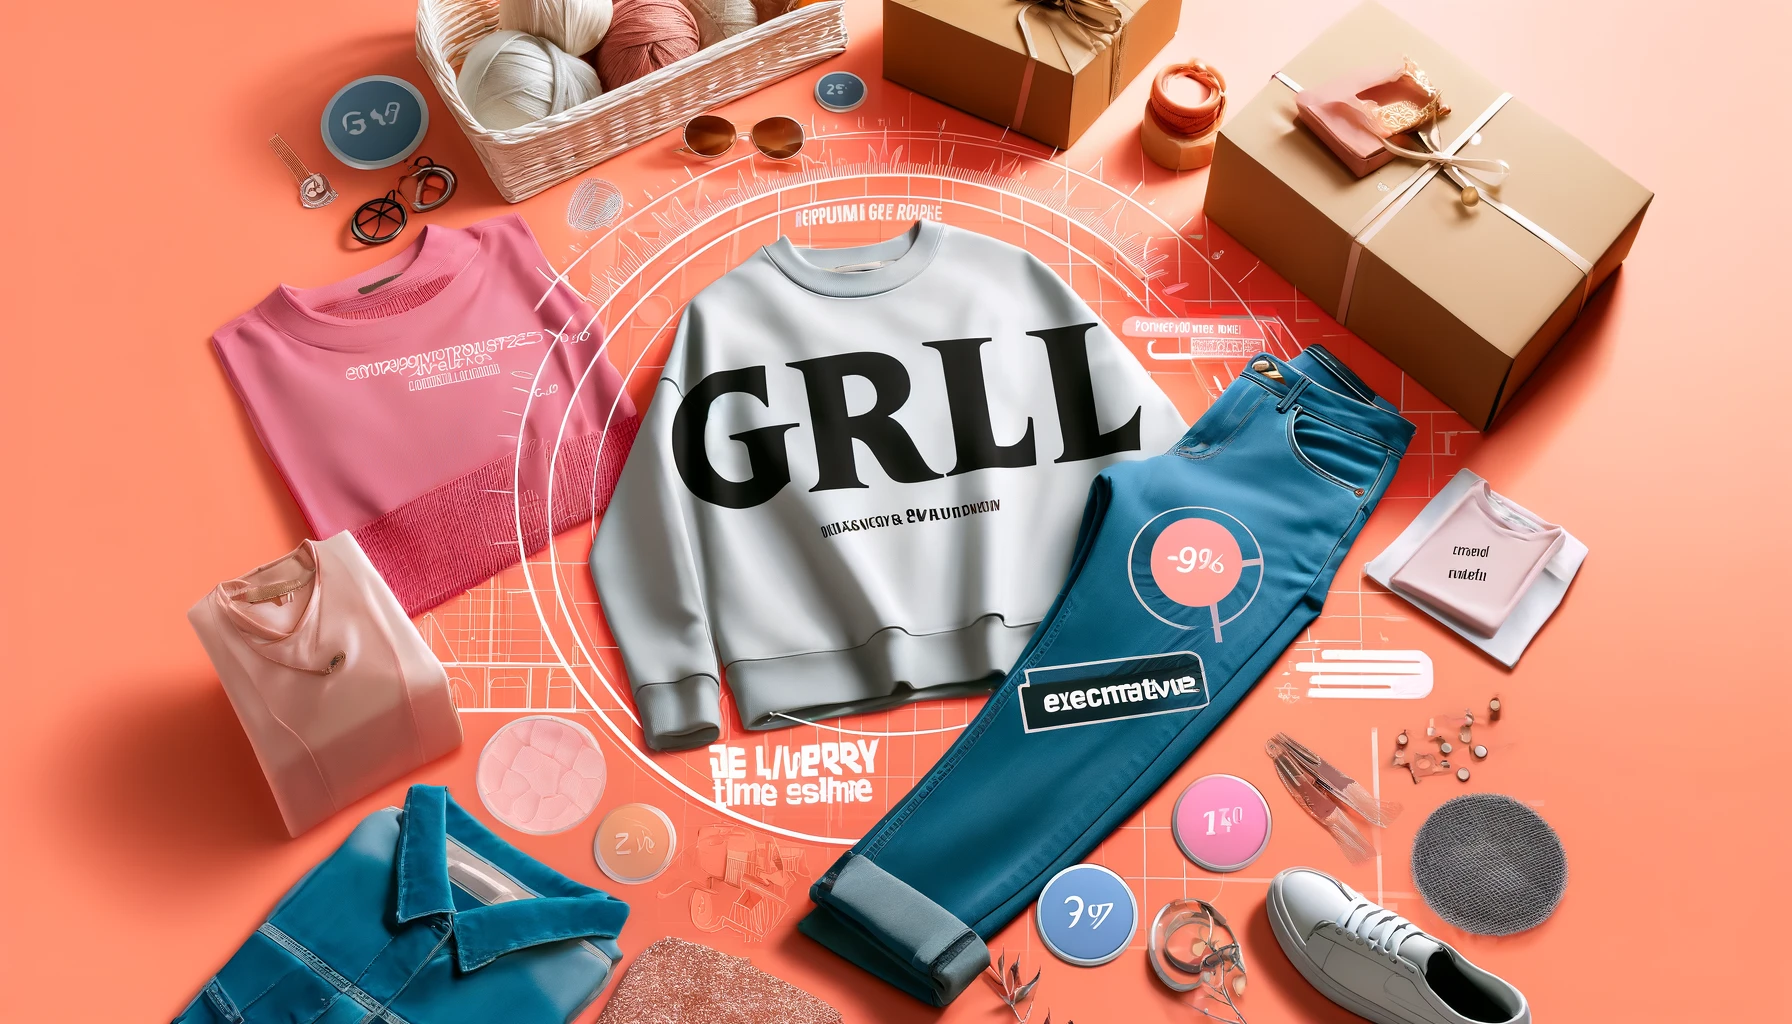 A stylish layout for a women's budget fashion brand named 'GRL' with a focus on delivery time estimate. The image features trendy and affordable clothing items displayed attractively, with visual elements representing the estimated time of arrival. Incorporate the word 'GRL' prominently in the design. The background should be vibrant and fashionable, reflecting the brand's appeal to young women. The image should be in a 16:9 aspect ratio.